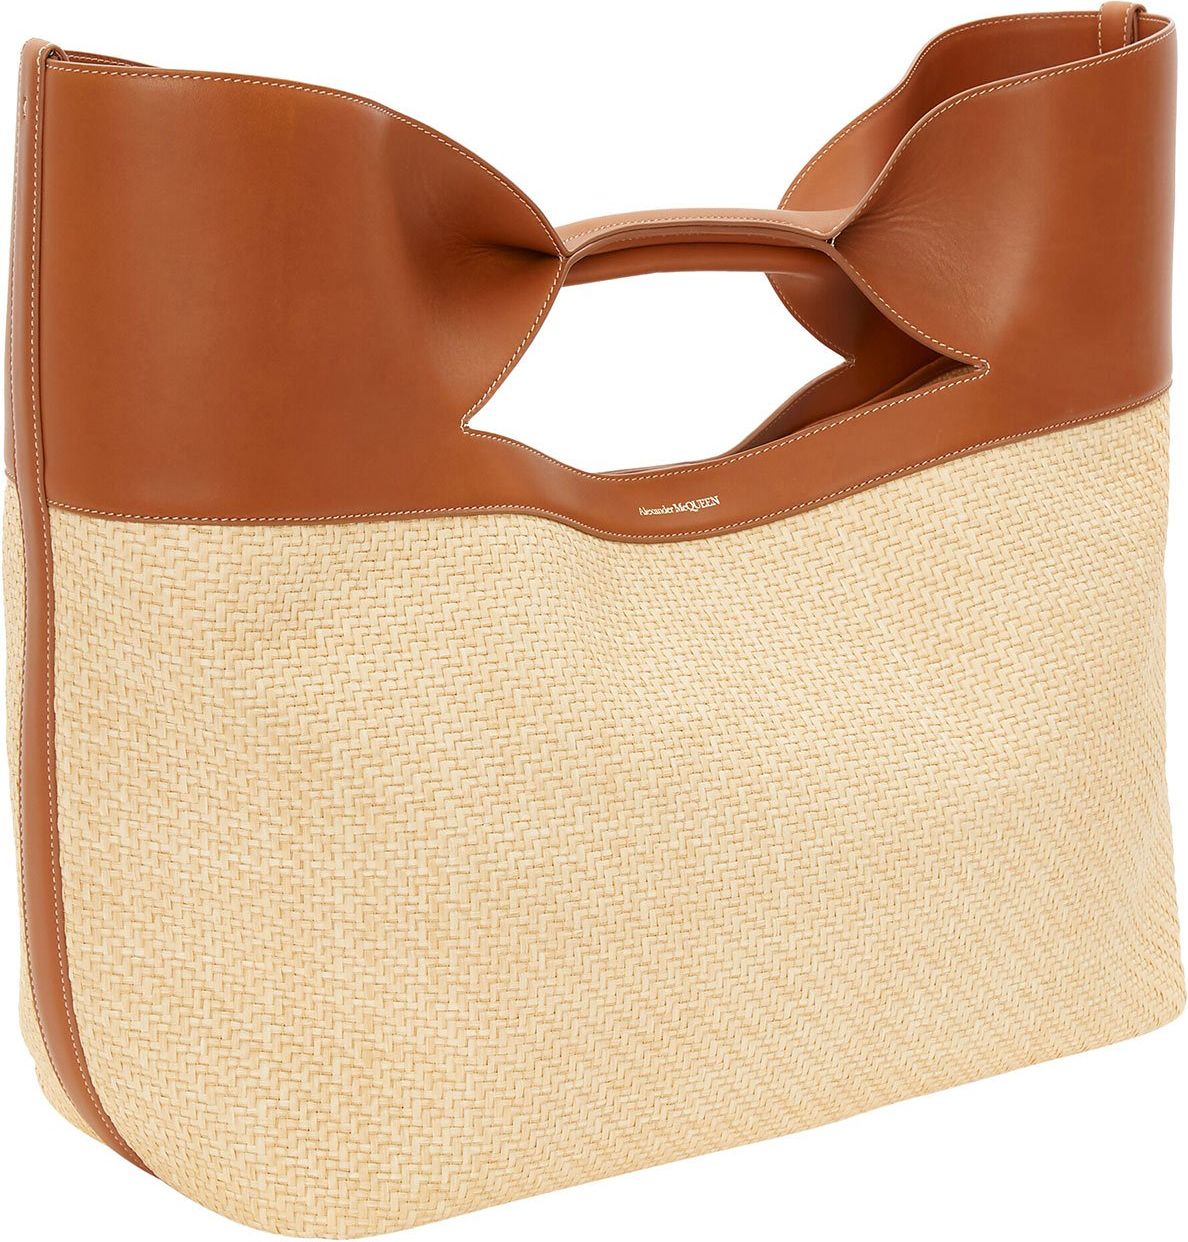 Alexander McQueen The Bow straw-woven tote bag Beige